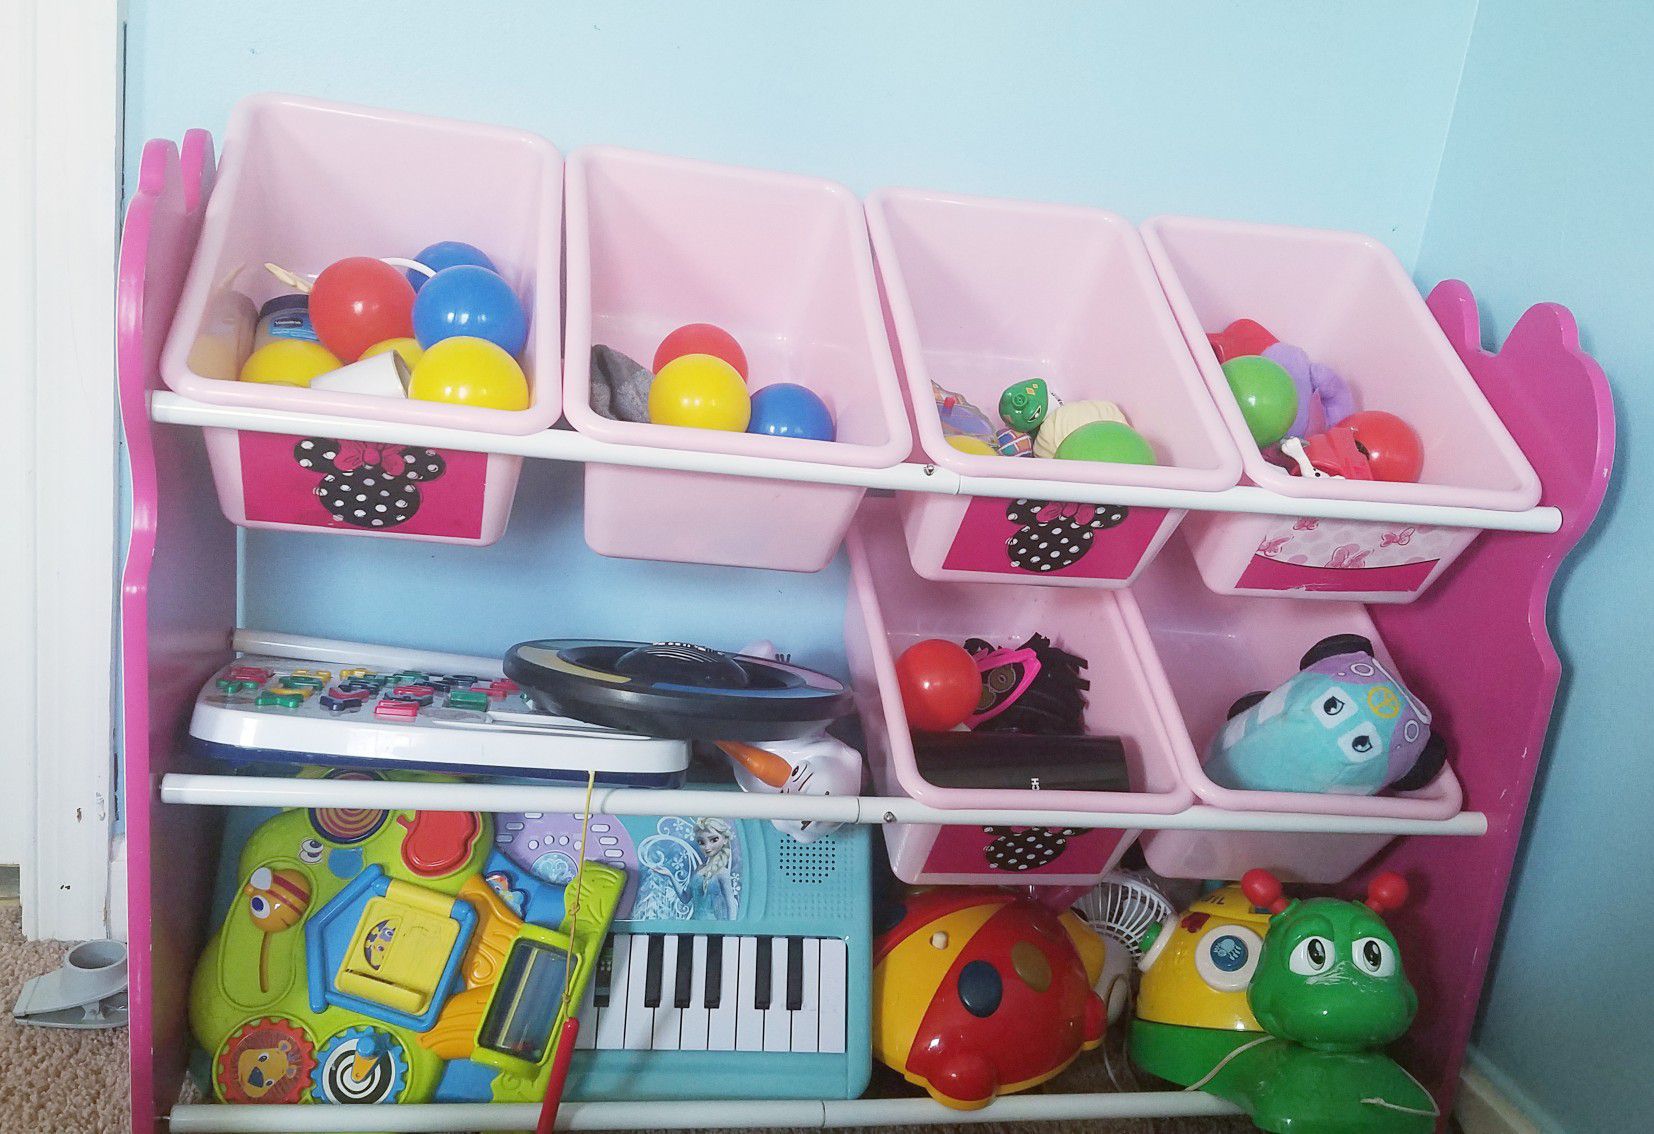 Toys with toy organizer